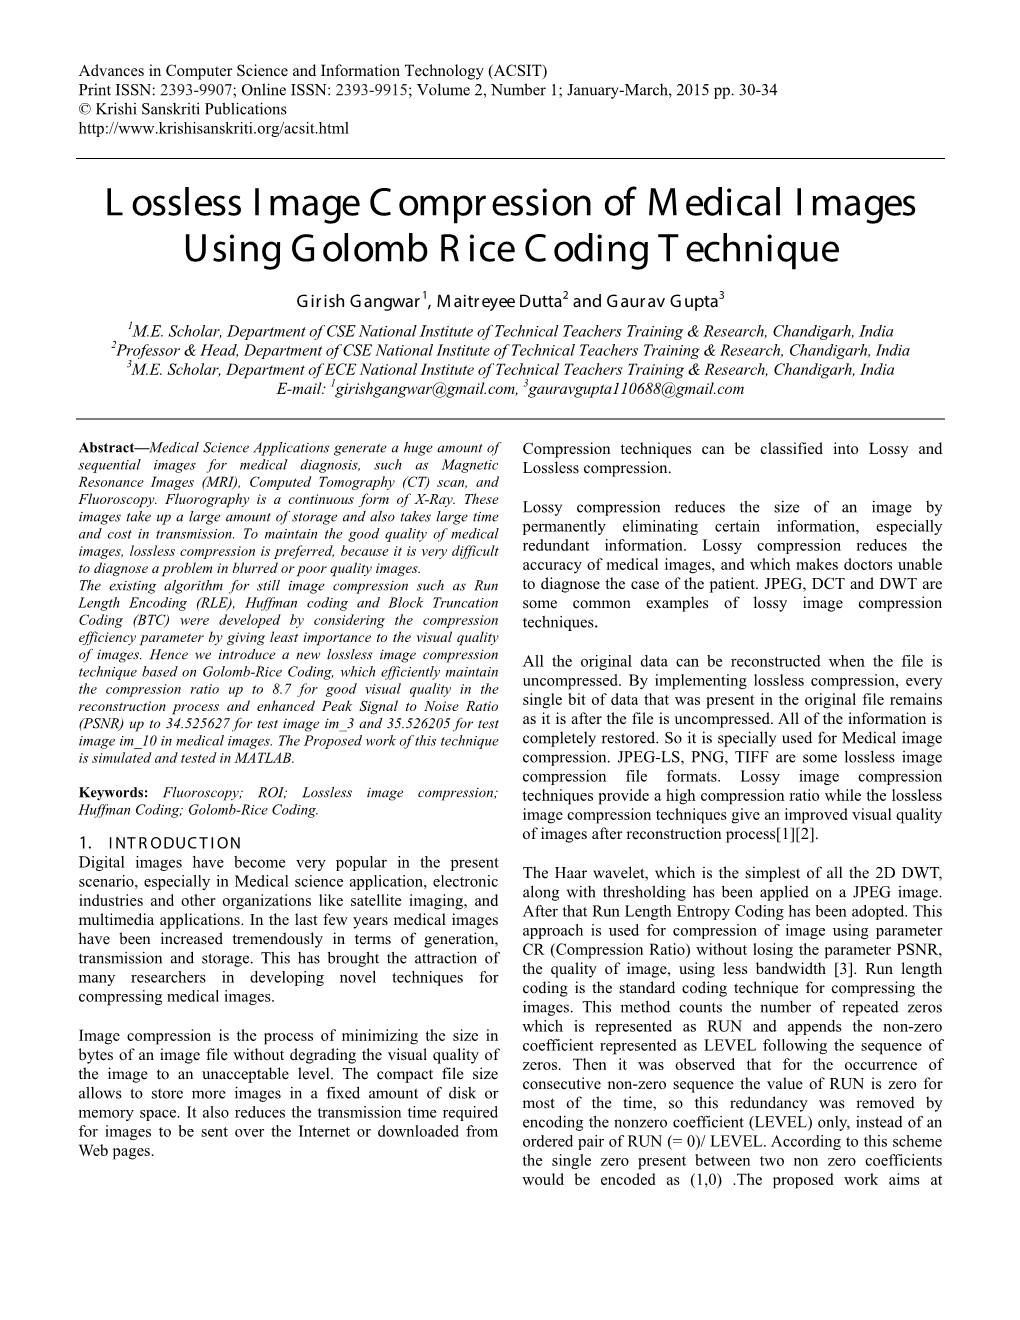 Lossless Image Compression of Medical Images Using Golomb Rice Coding Technique 31